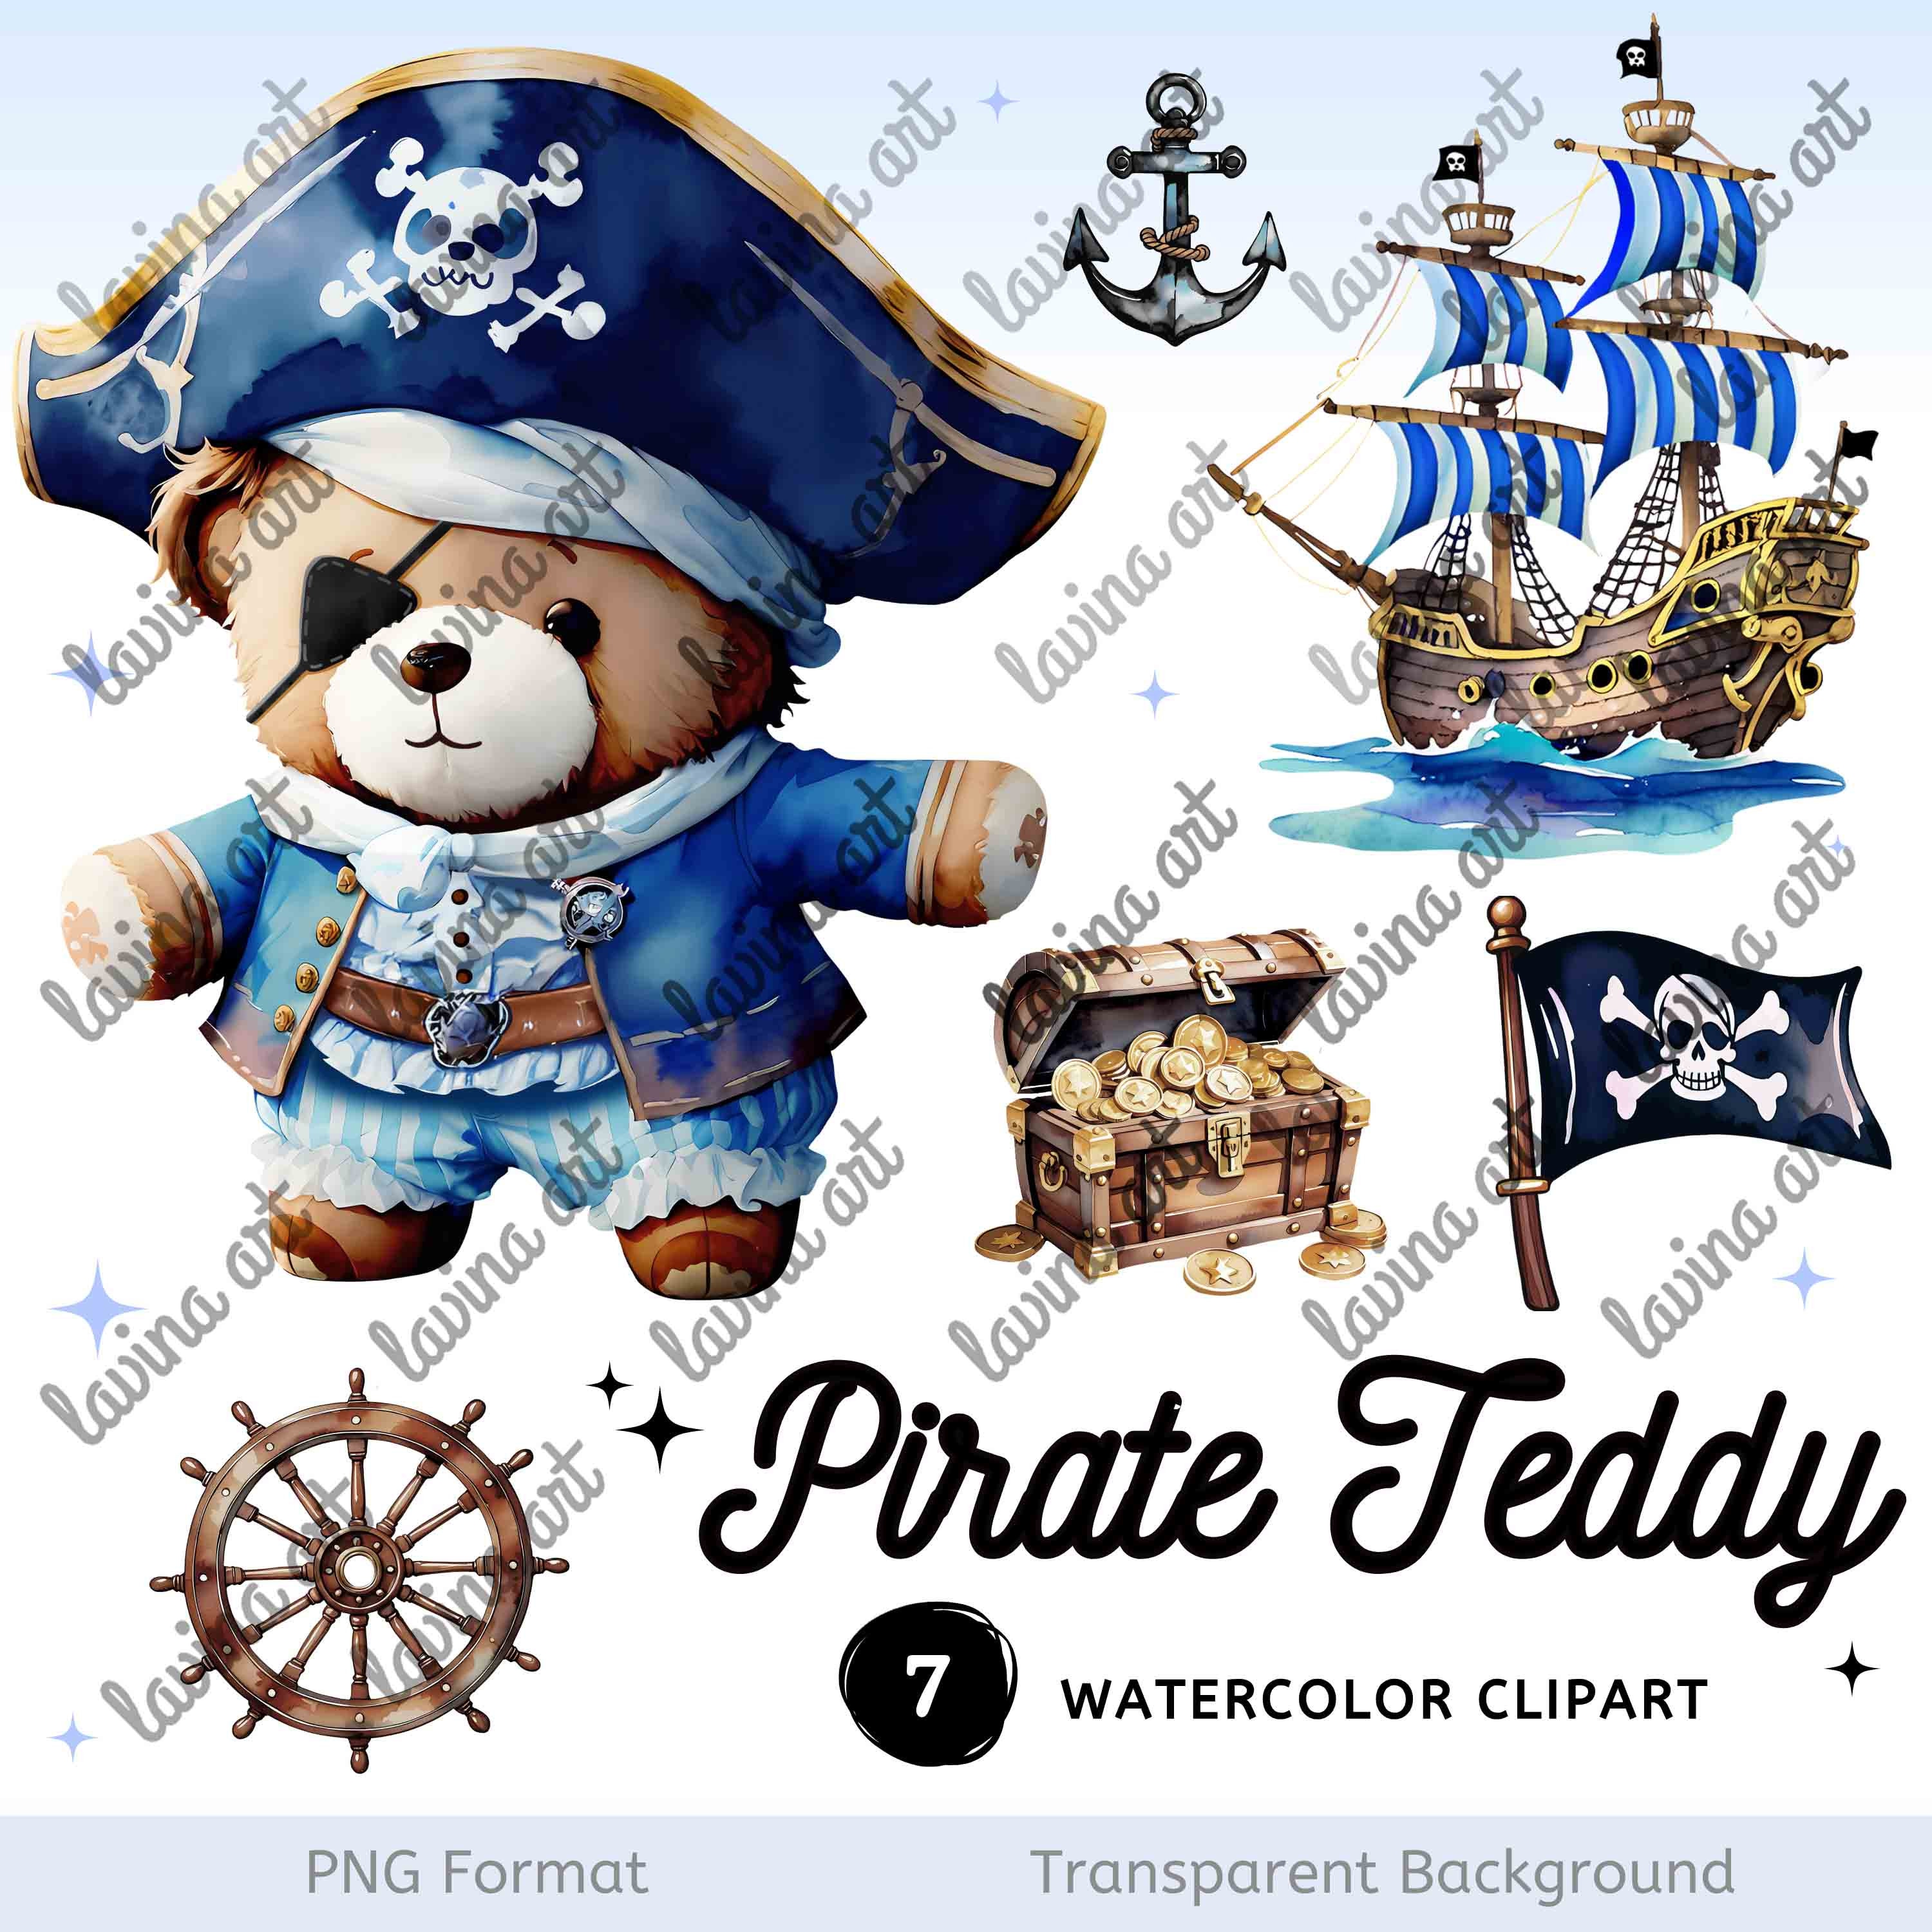 Cuddly Teddy Bear Pirate - Bear Art - Posters and Art Prints